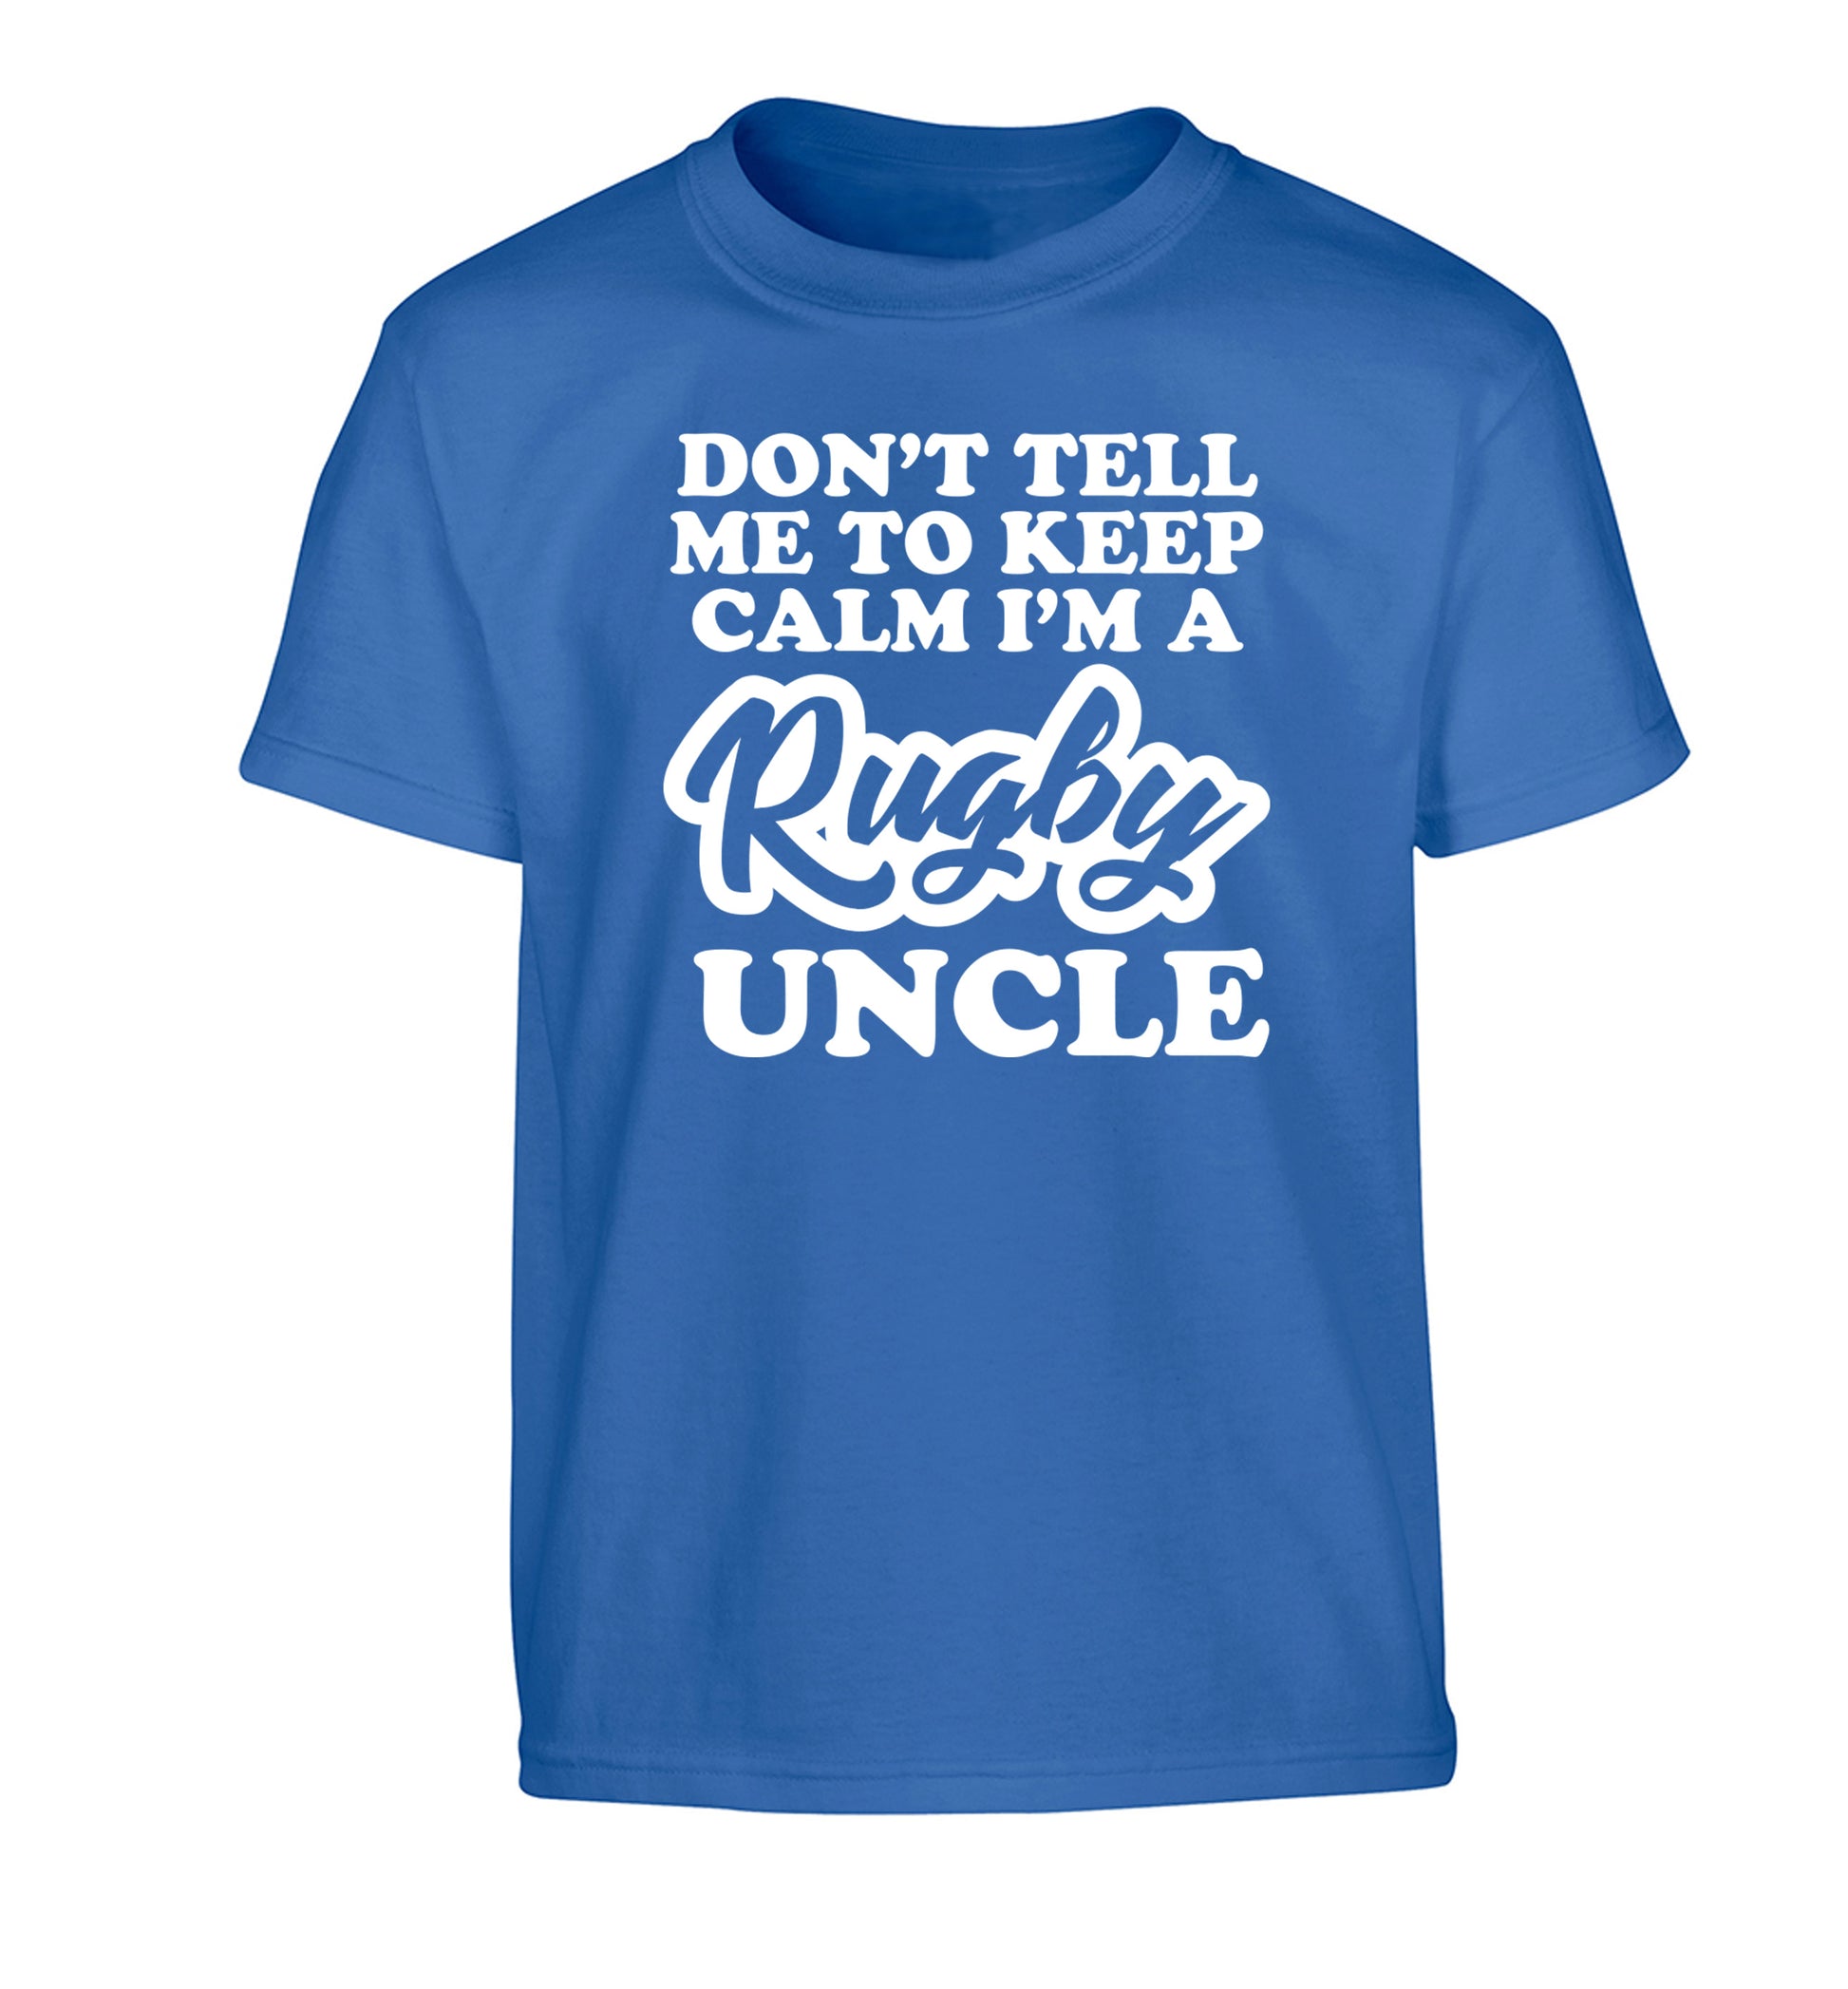 Don't tell me to keep calm I'm a rugby uncle Children's blue Tshirt 12-13 Years